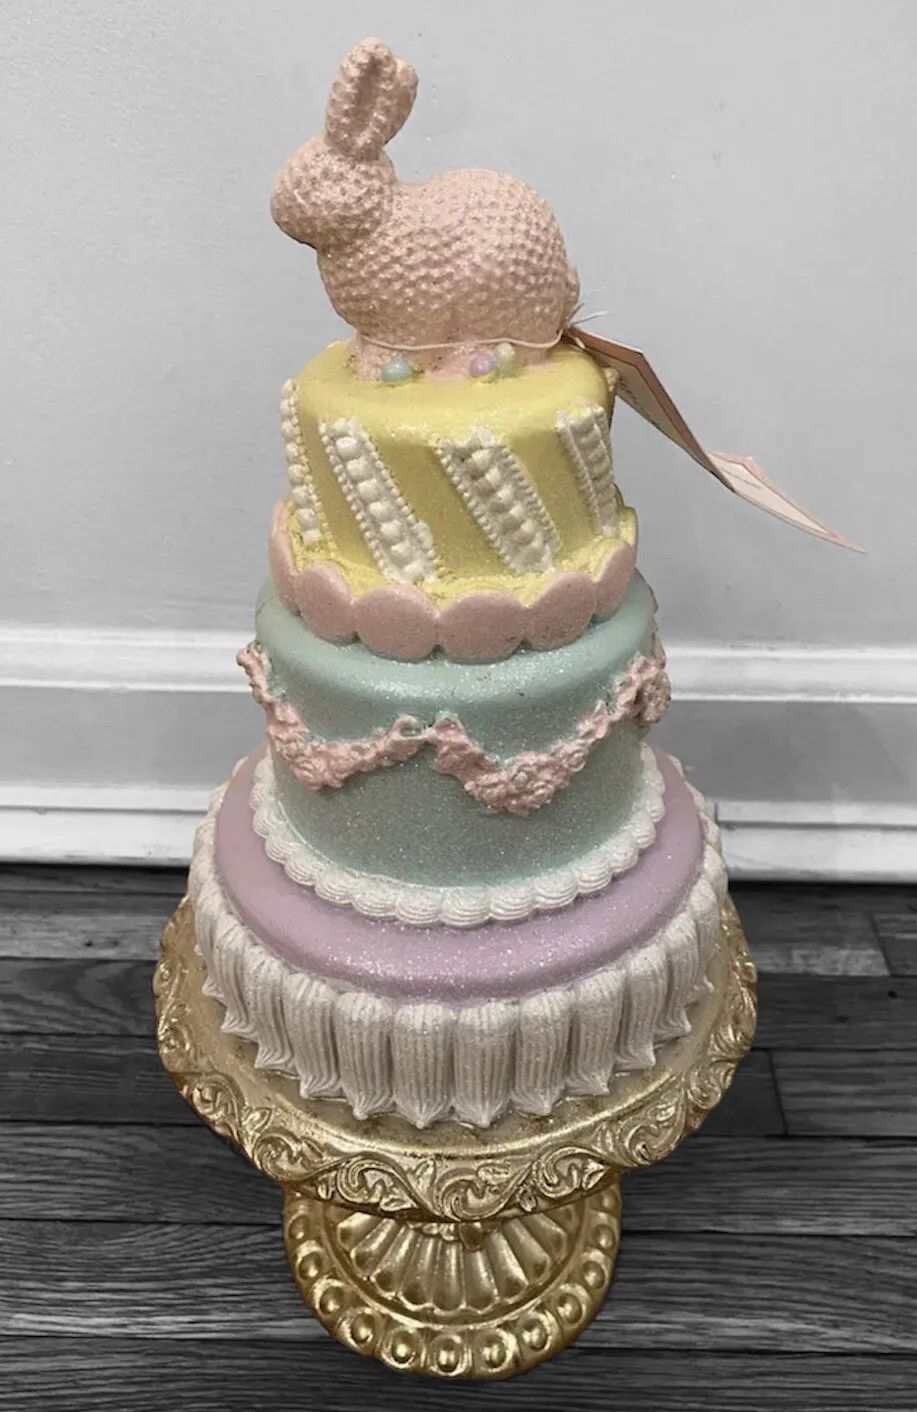 Cupcakes and Cashmere Pastel Easter Bunny Cake on Cake Stand 14”  | eBay | eBay US